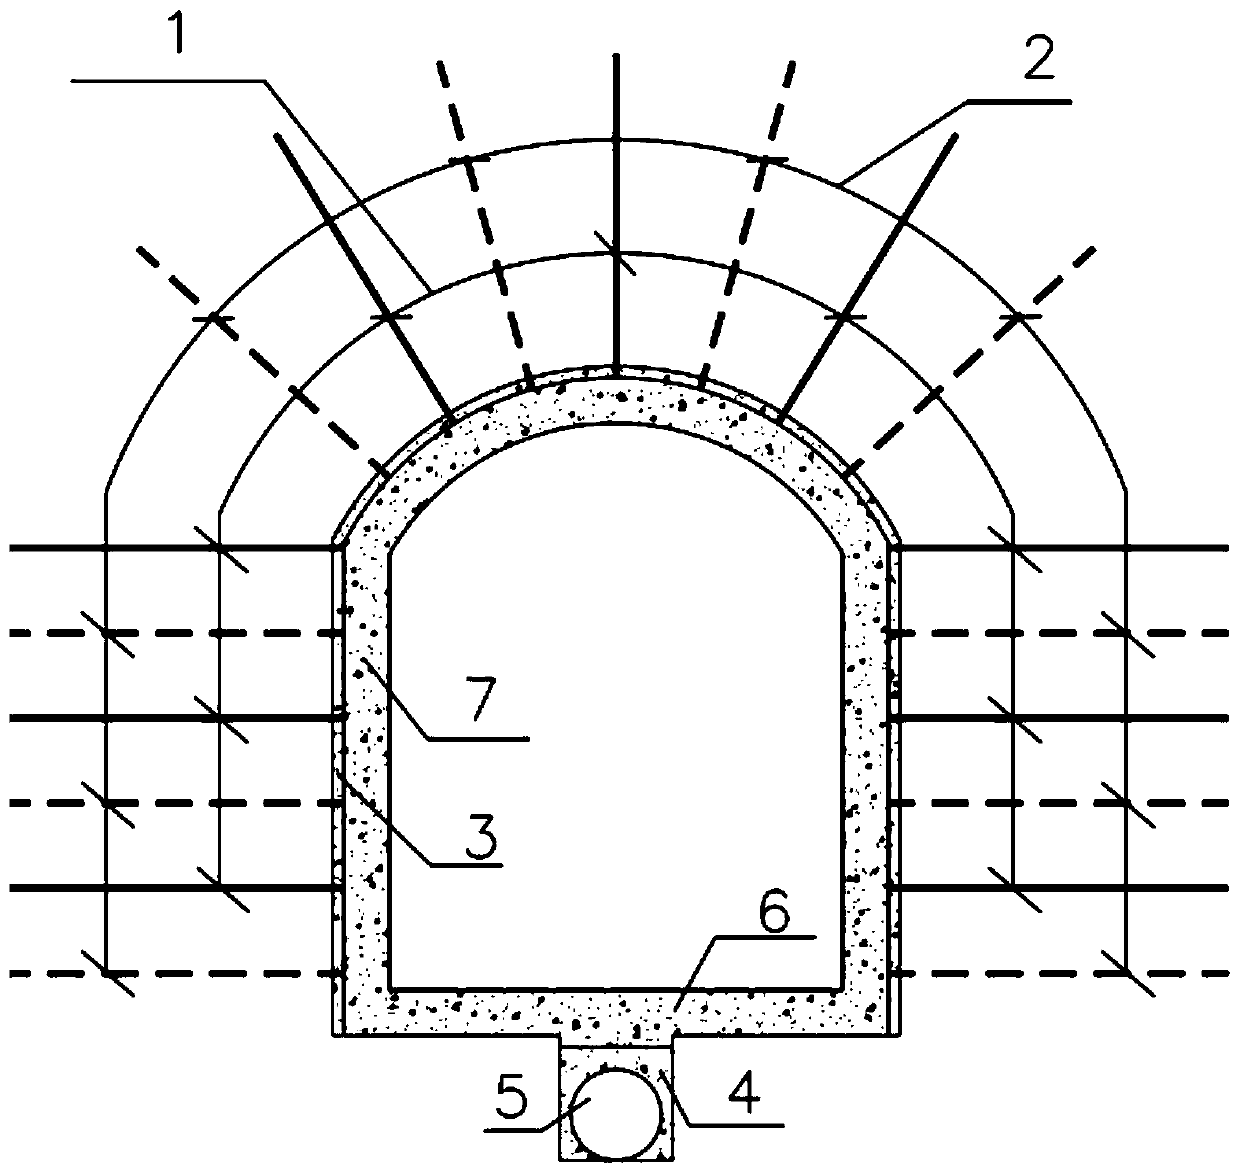 A repairable drainage tunnel, construction method and repair method